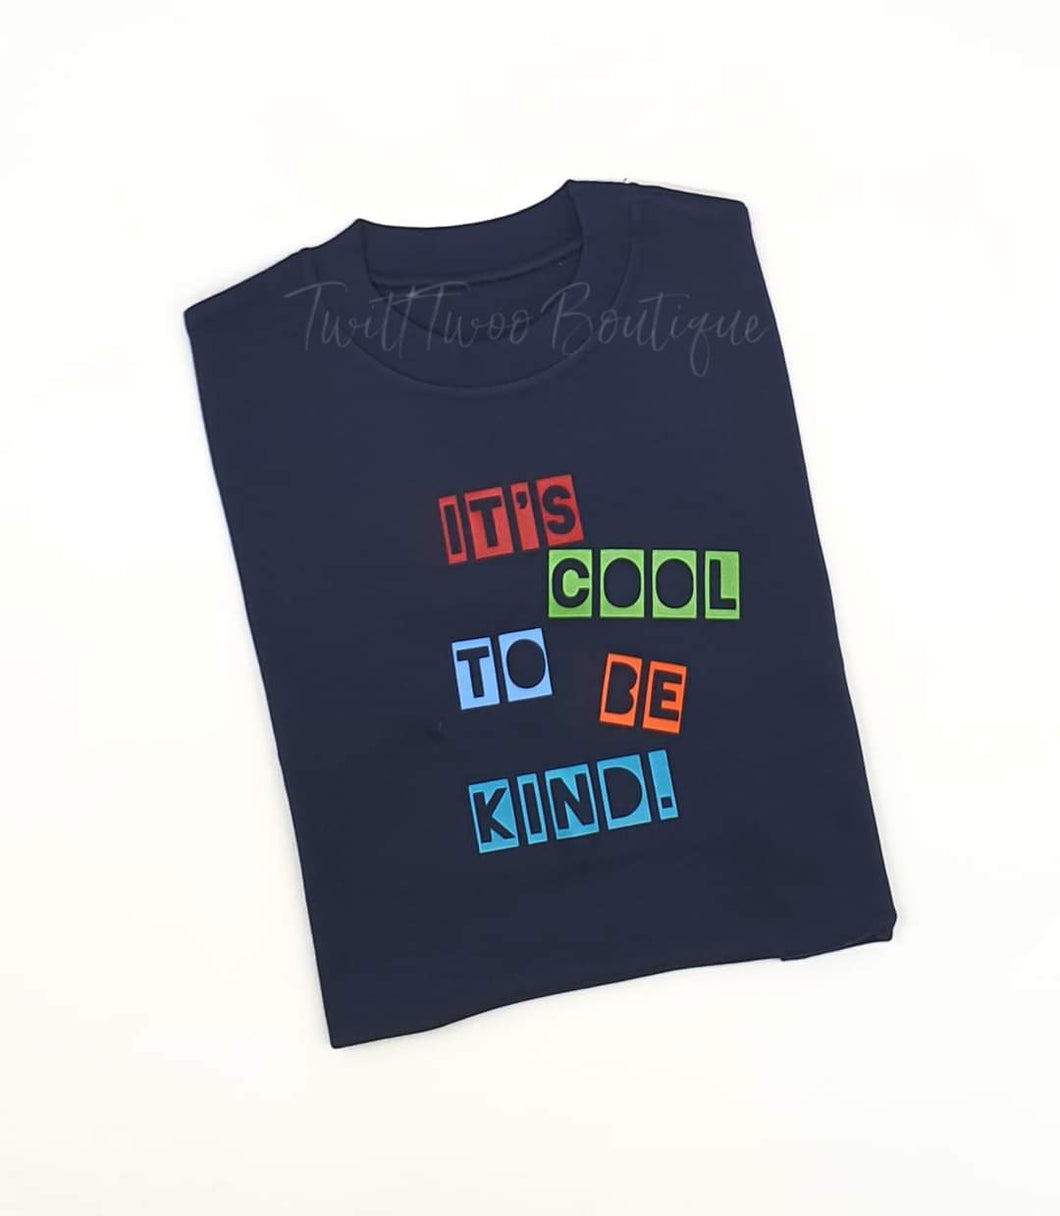 Cool to be kind tshirt